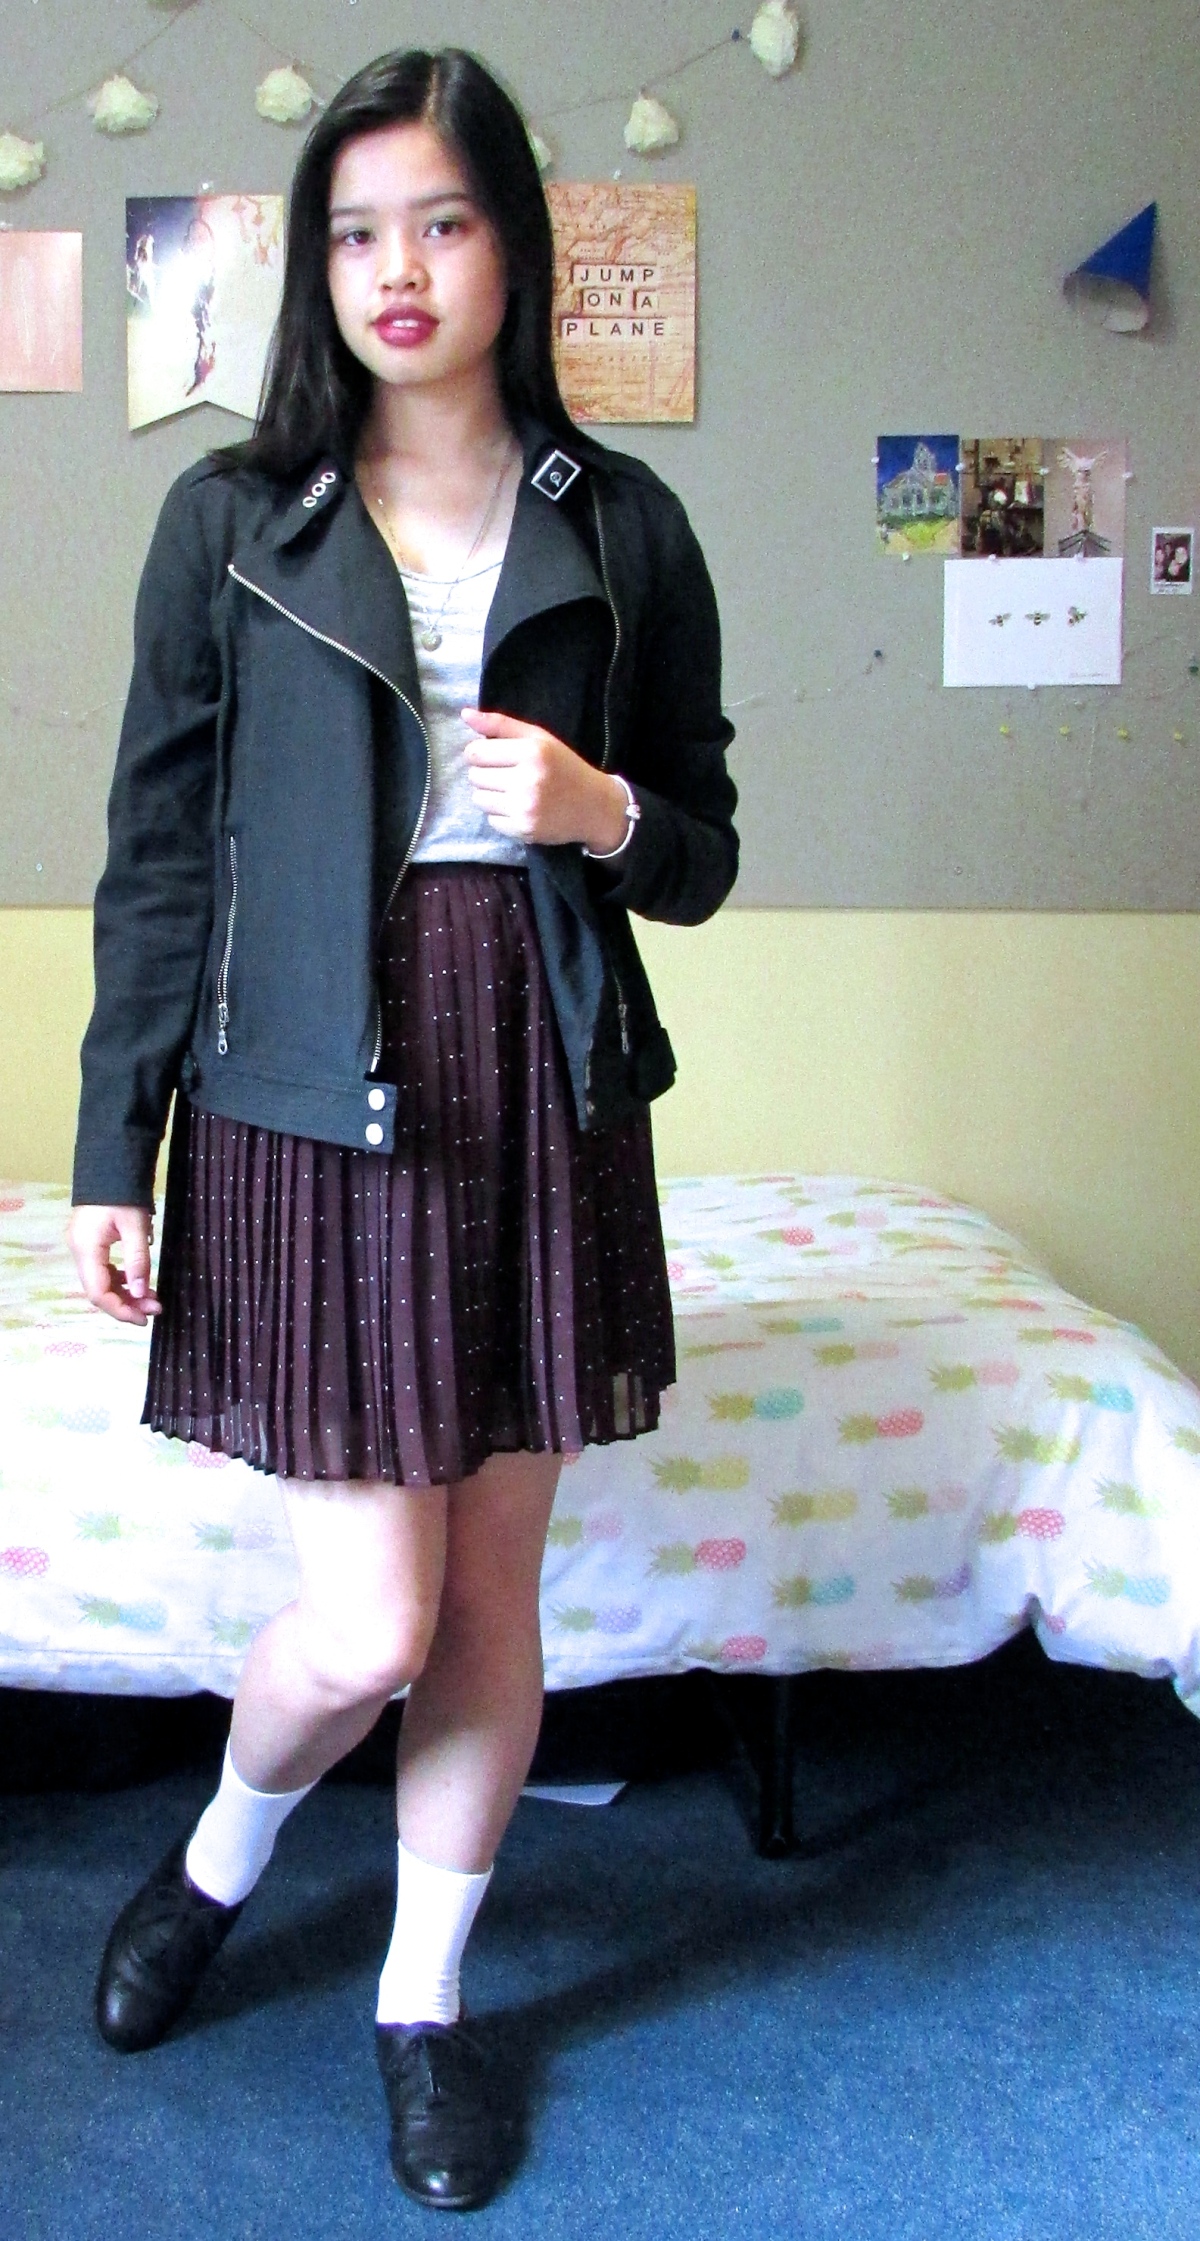 Outfit of the Week: The Student